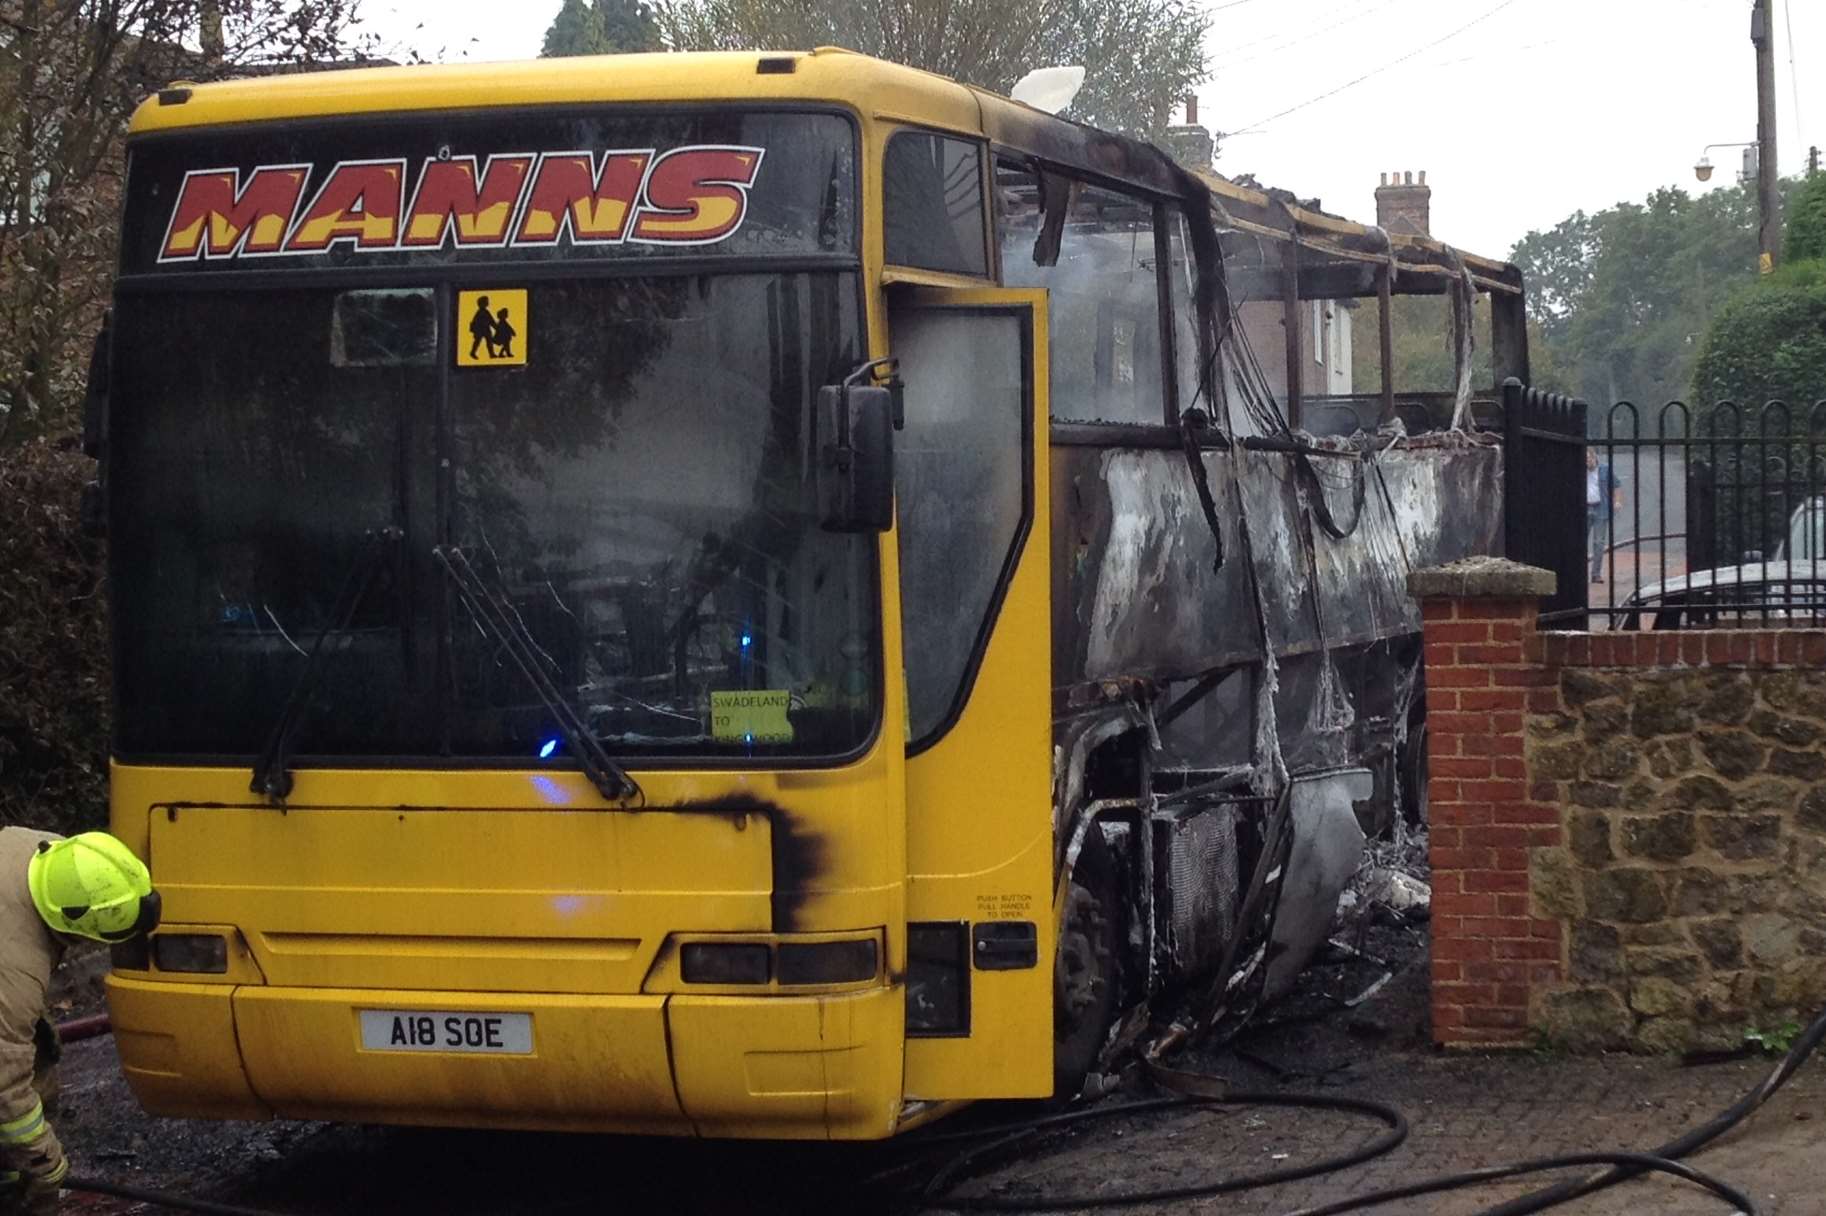 The Manns coach was gutted in the blaze. Picture: Nipper